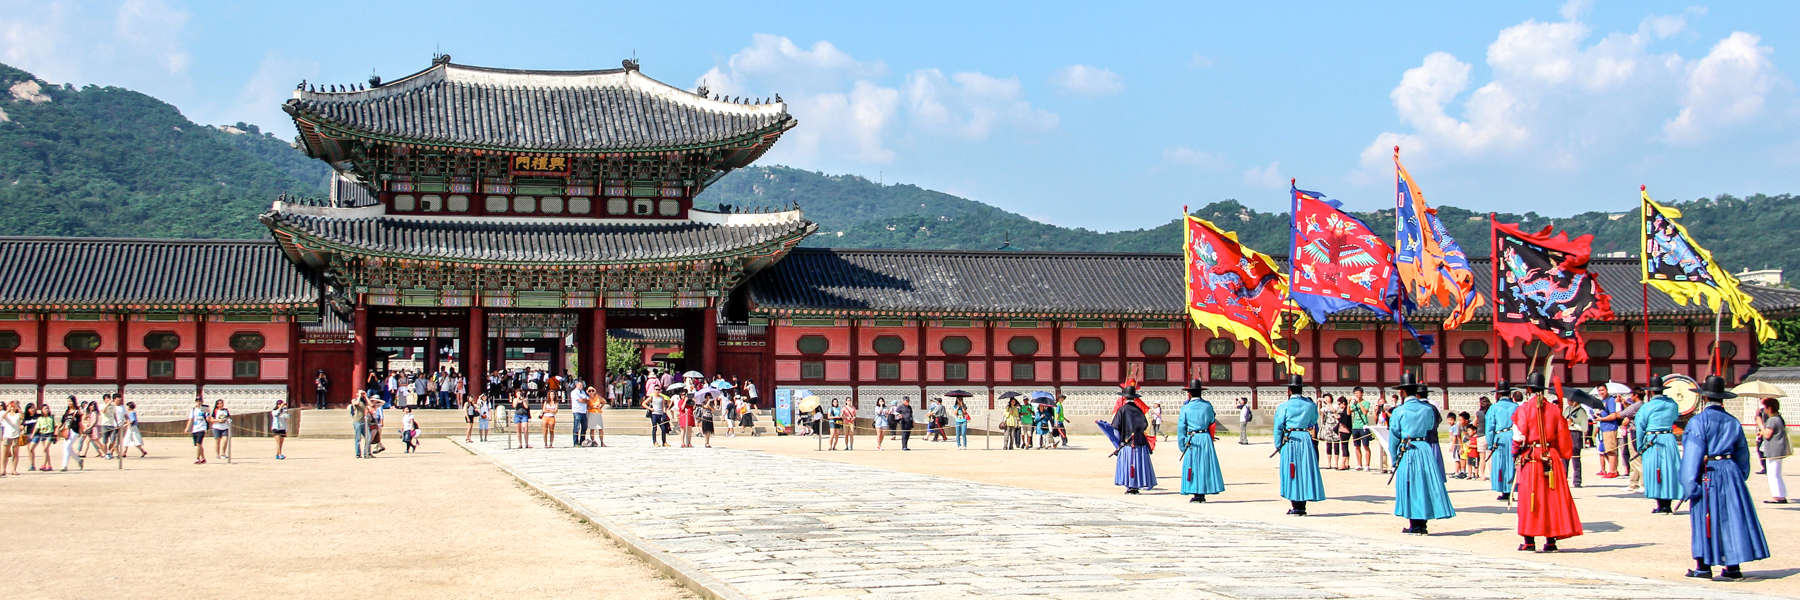 Performers in colourful traditional dress wave flags in front of the two-tier pagoda of Gyeongbokgung Palace in South Korea.